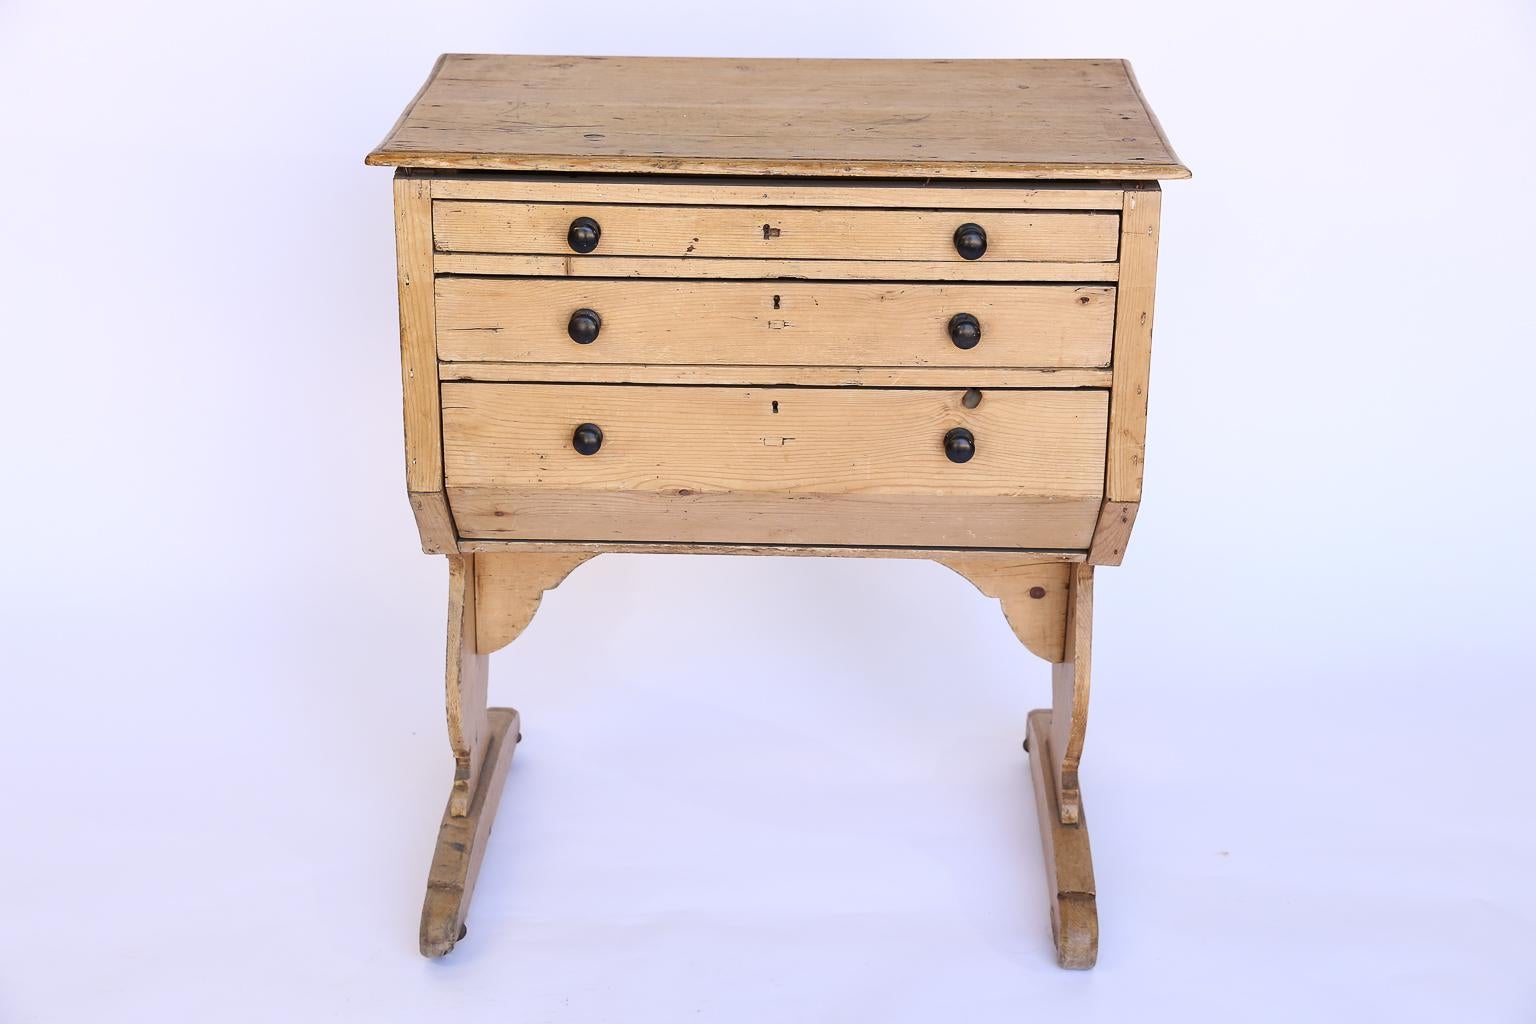 Found in France, this vintage sewing table would look great in a bedroom, powder room or hallway. It has several storage drawers and a nice top surface which could be used for displaying decorative items. Each of the three drawers have several built